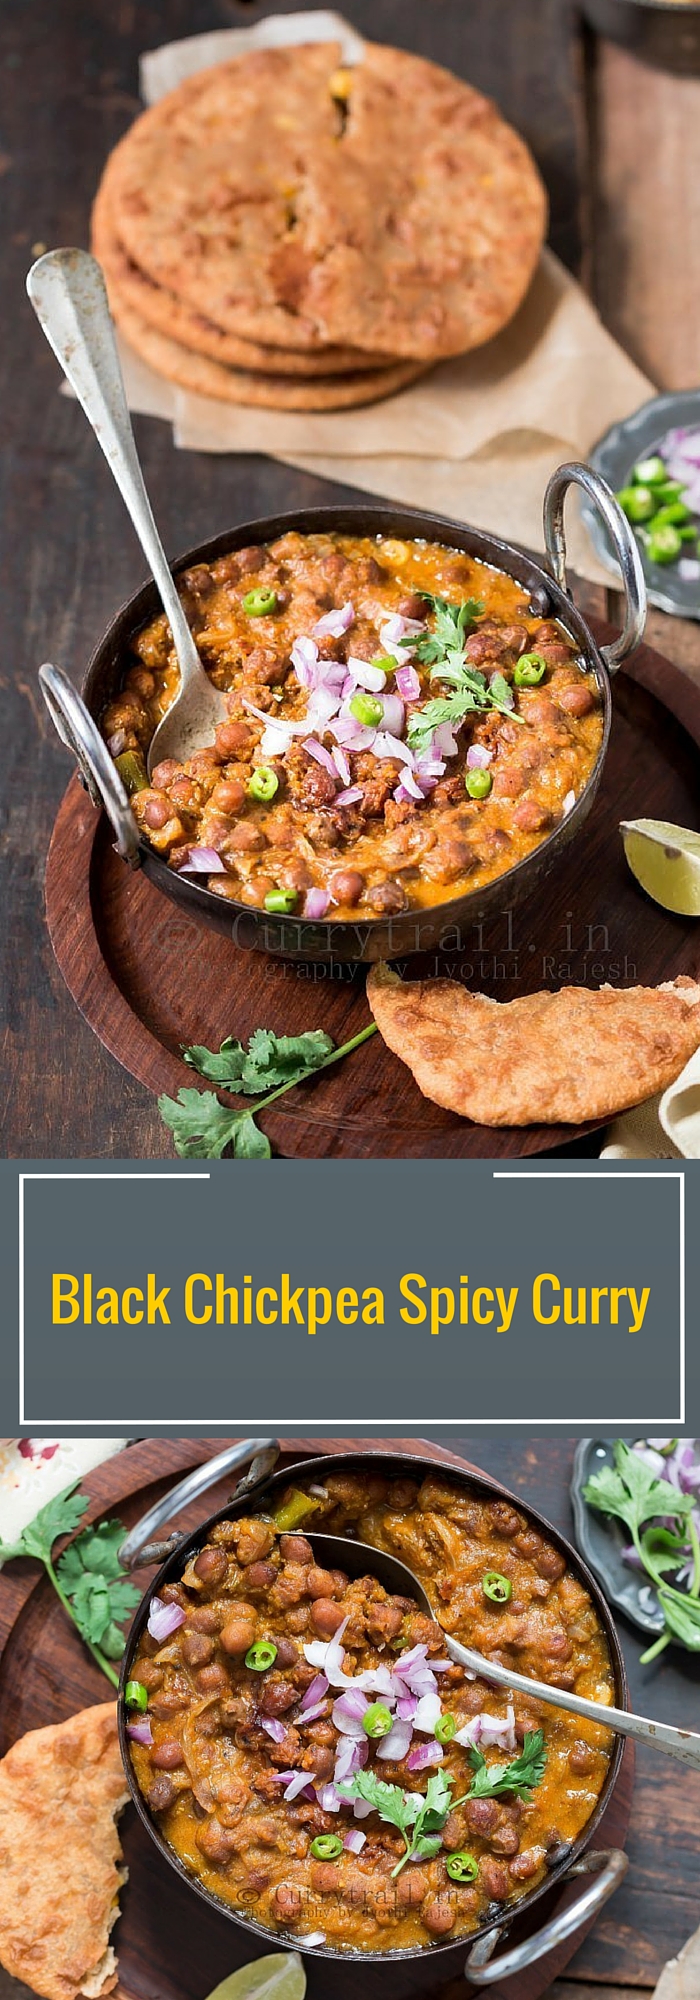 Black Chickpea Spicy Curry